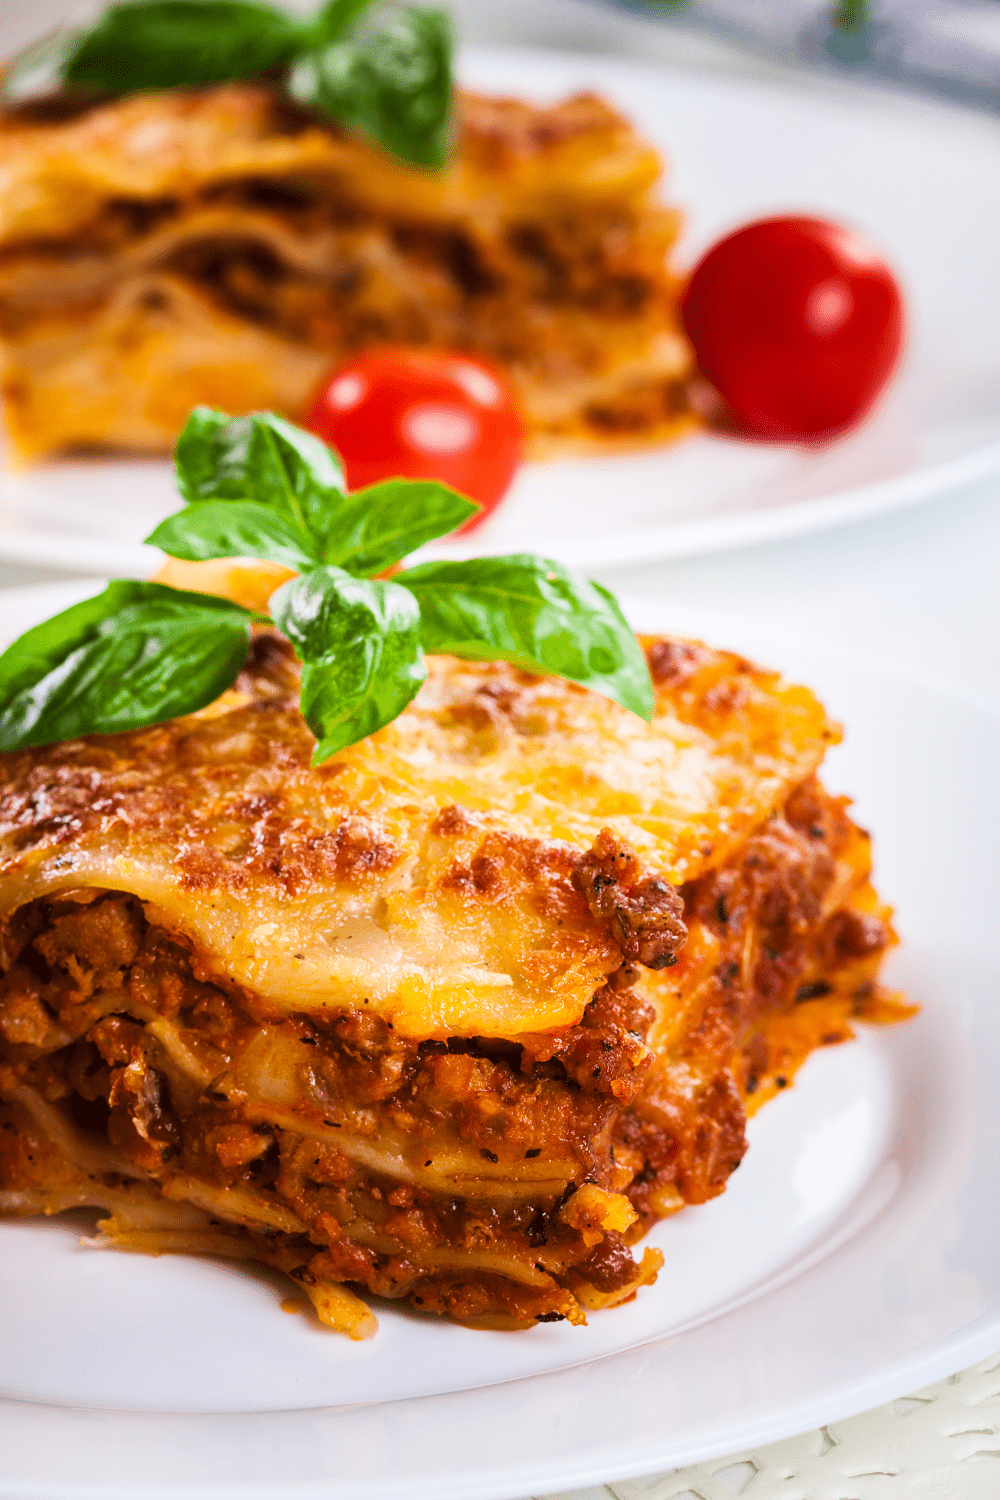 How to Cook Kirkland Signature's Lasagna in the Oven